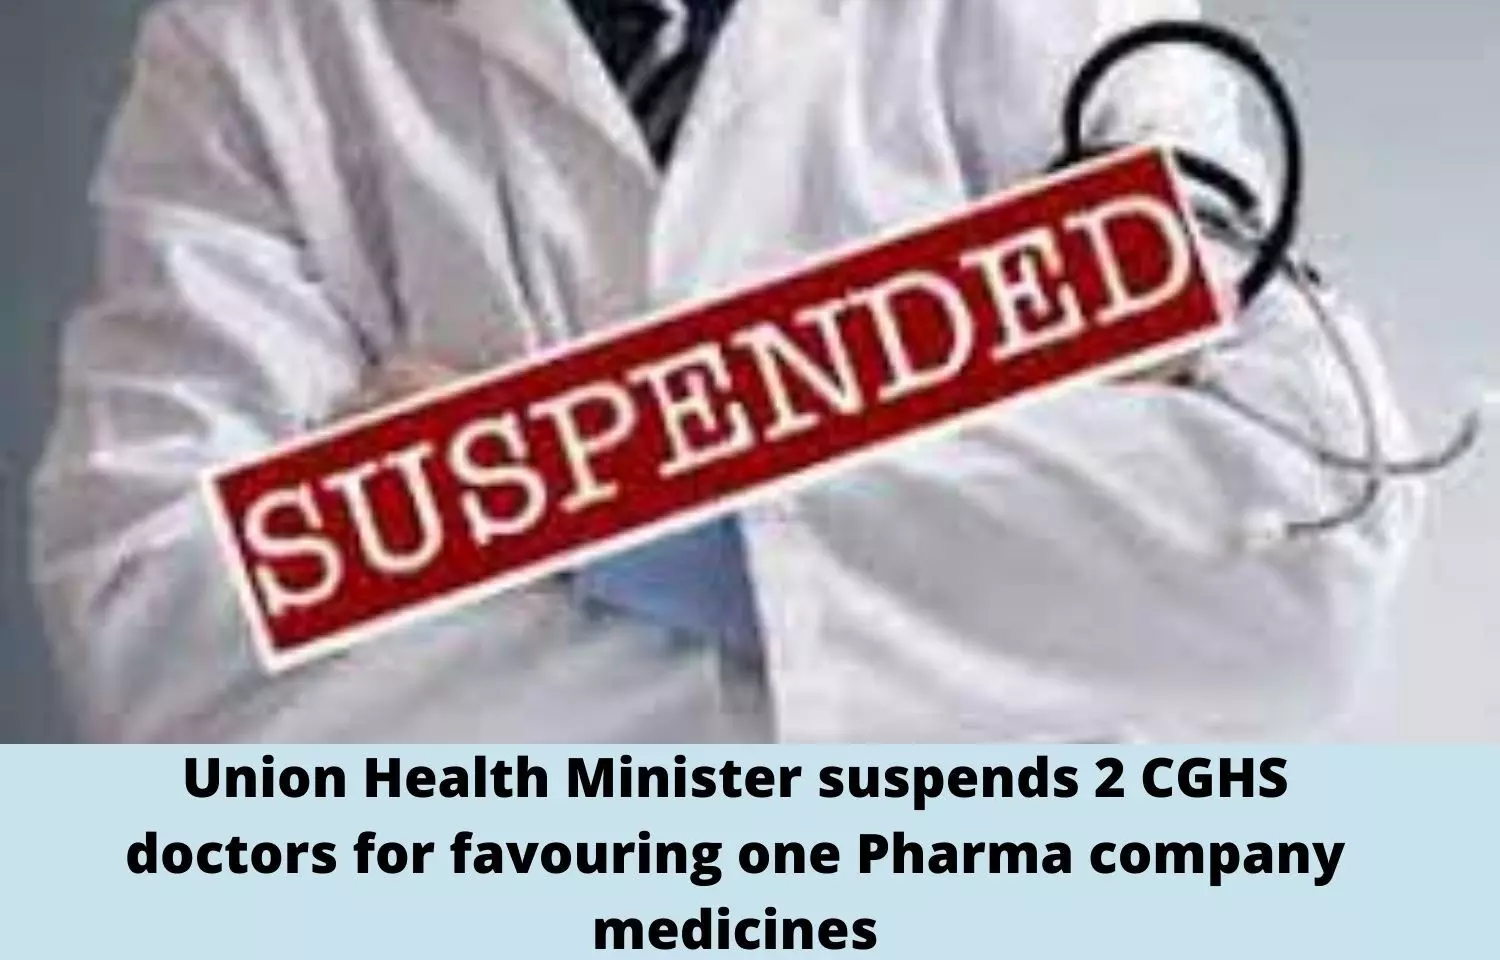 Union Health Minister suspends 2 CGHS doctors for favouring one Pharma company medicines